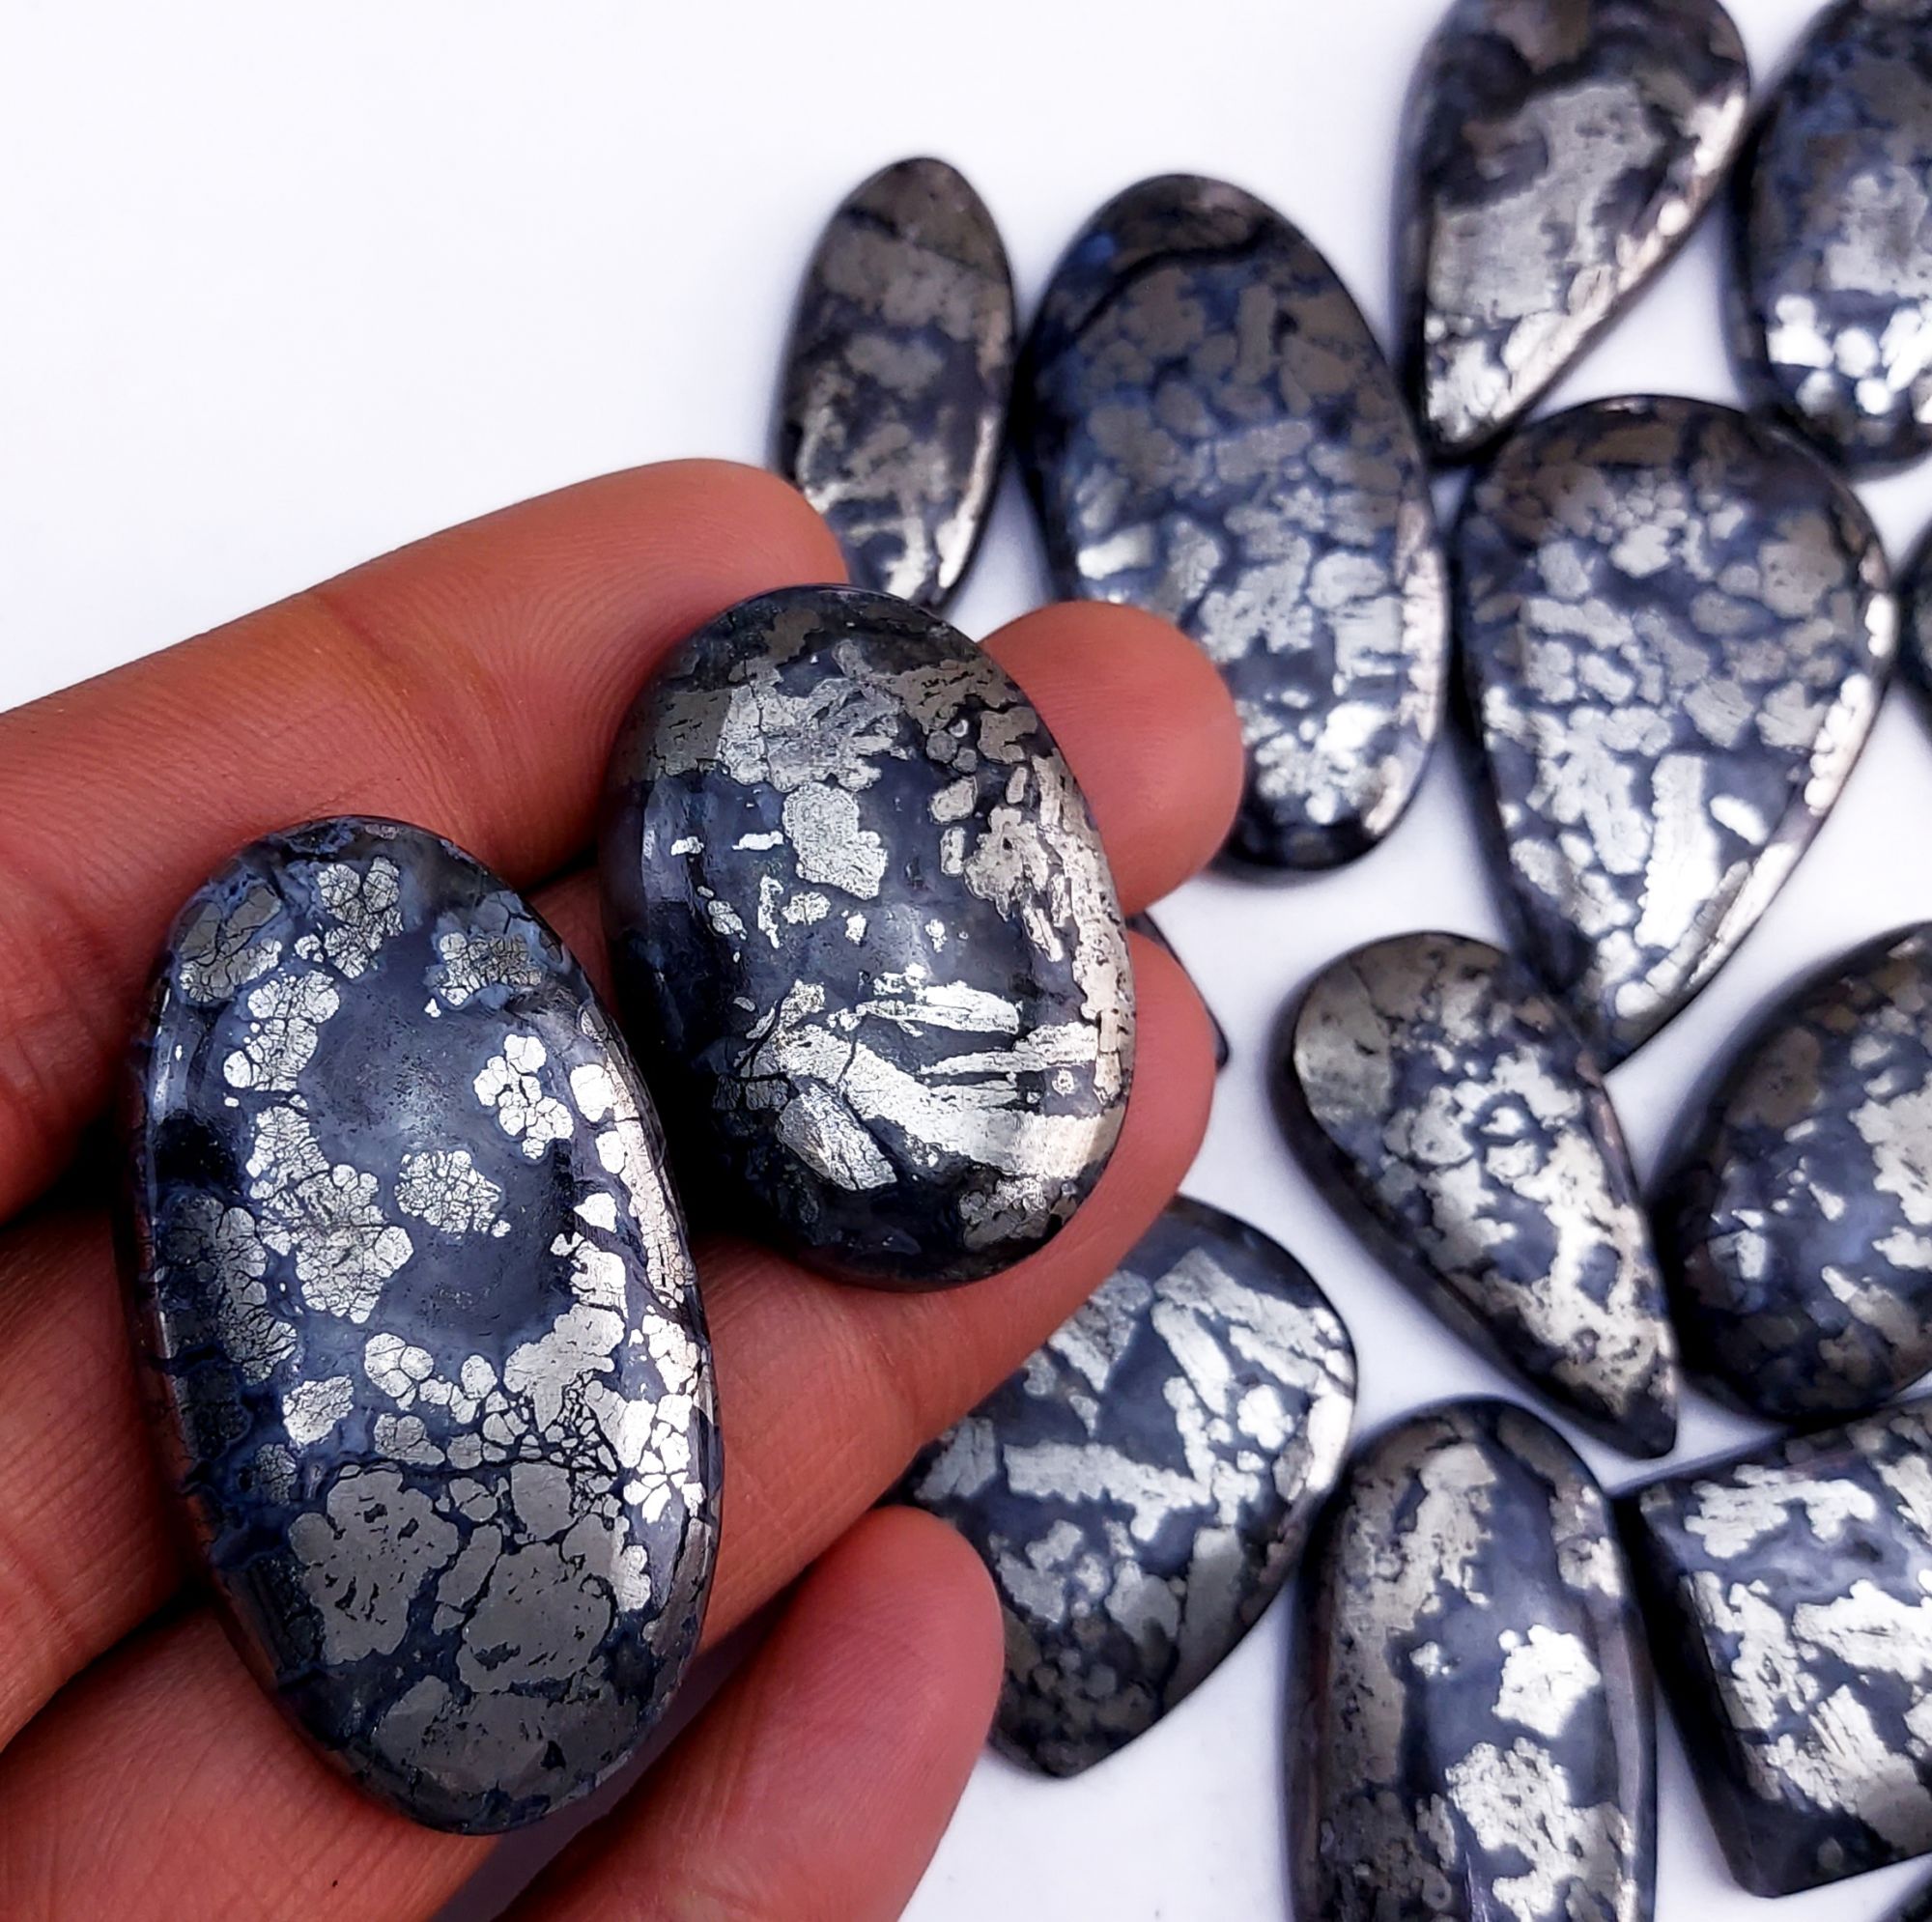 18Pcs 888Cts Natural Marcasite Grey Cabochon Back Side Unpolished Gemstone Semi-Precious Gemstones For Jewelry Making 45x25 28x20 mm #10036